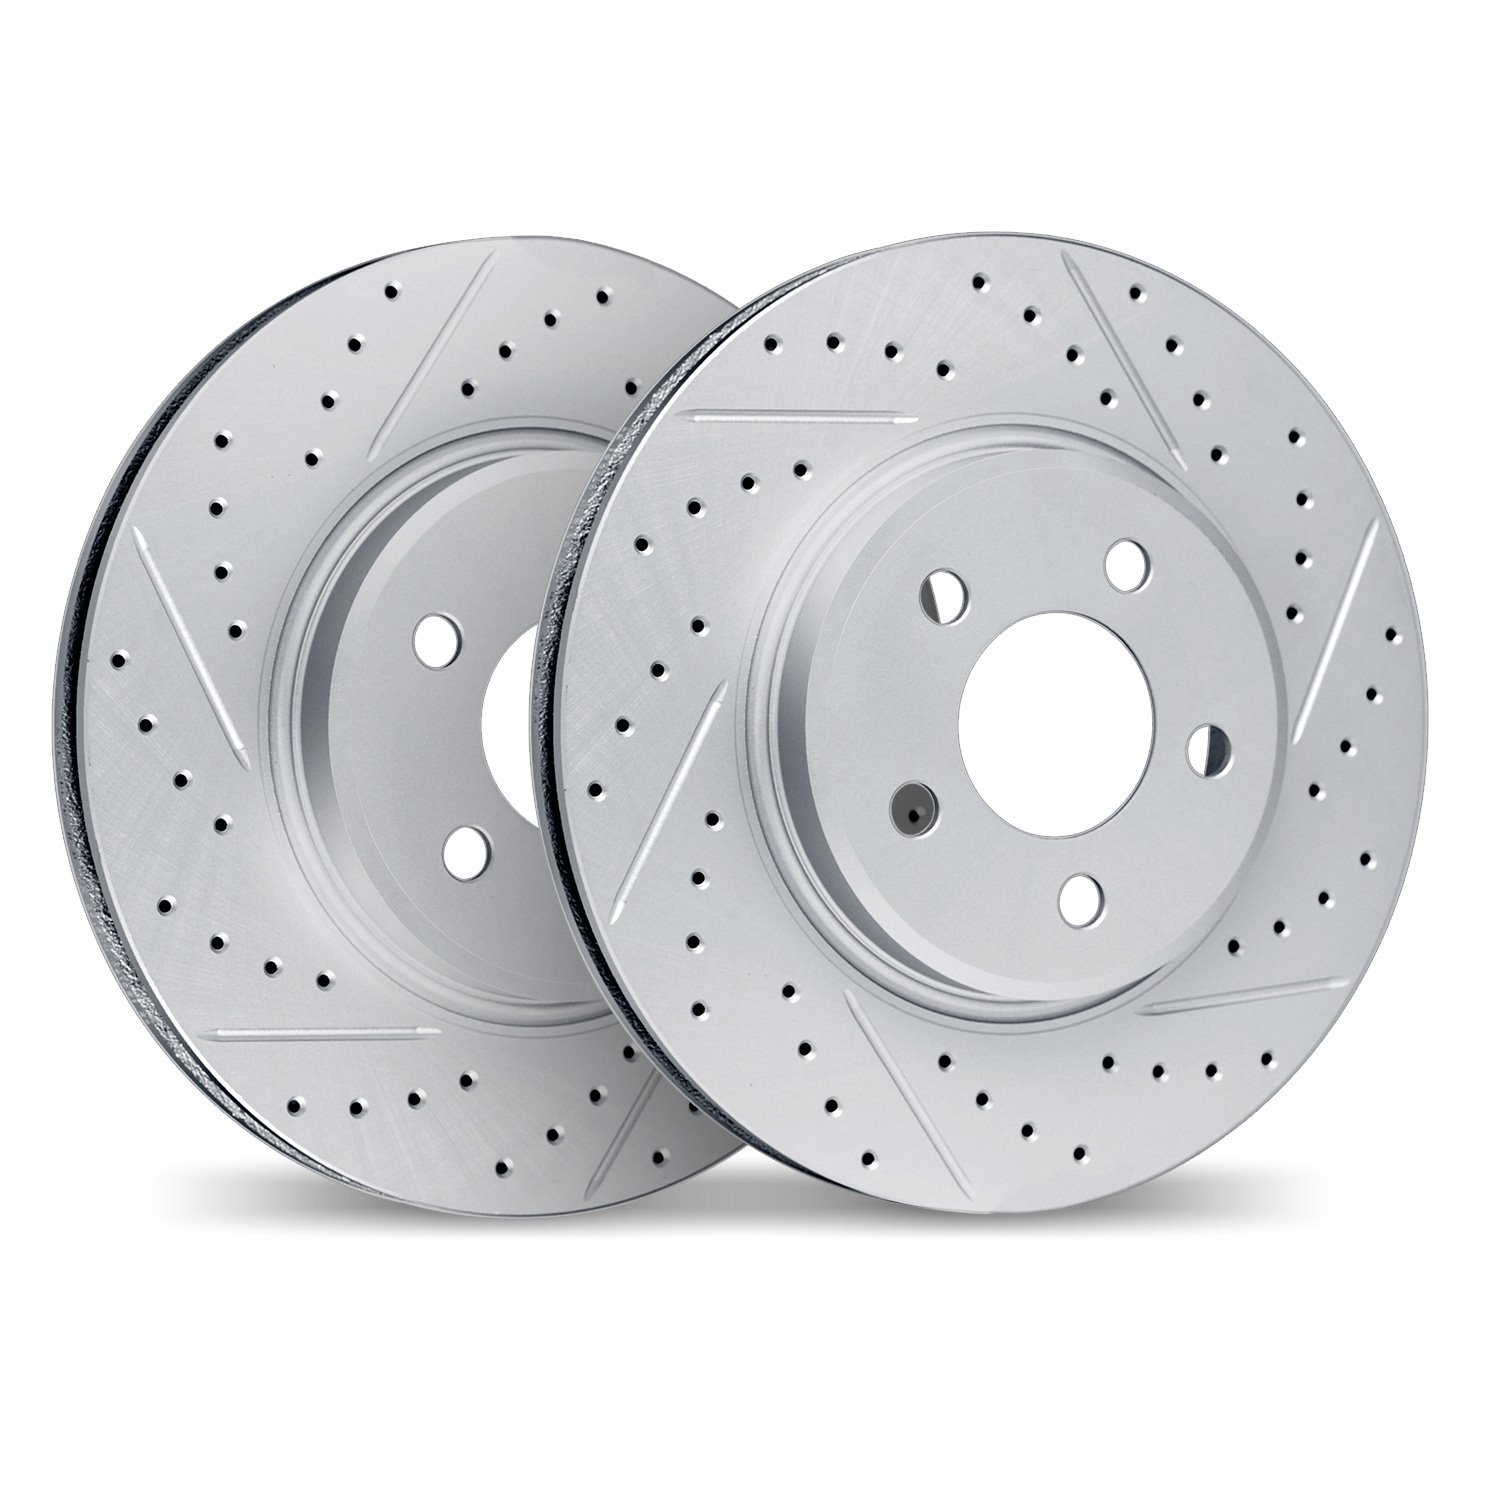 2002-13018 Geoperformance Drilled/Slotted Brake Rotors, Fits Select Subaru, Position: Rear